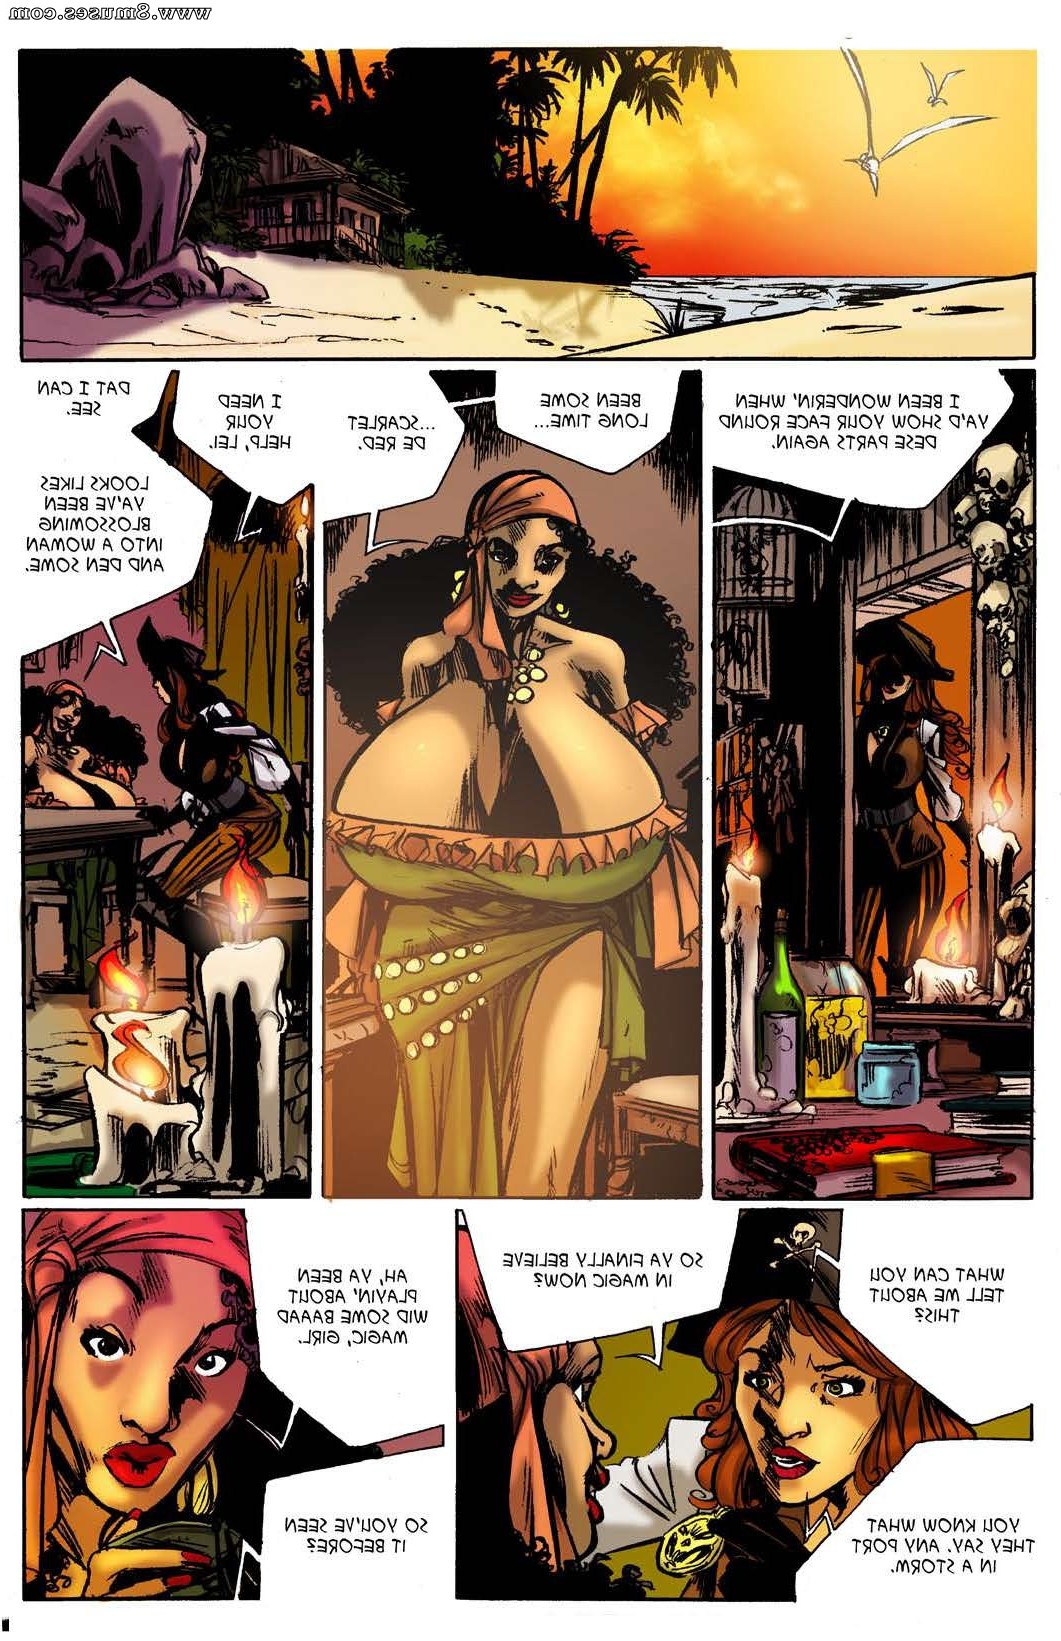 BE-Story-Club-Comics/A-Pirates-Life/Issue-2 A_Pirates_Life_-_Issue_2_2.jpg